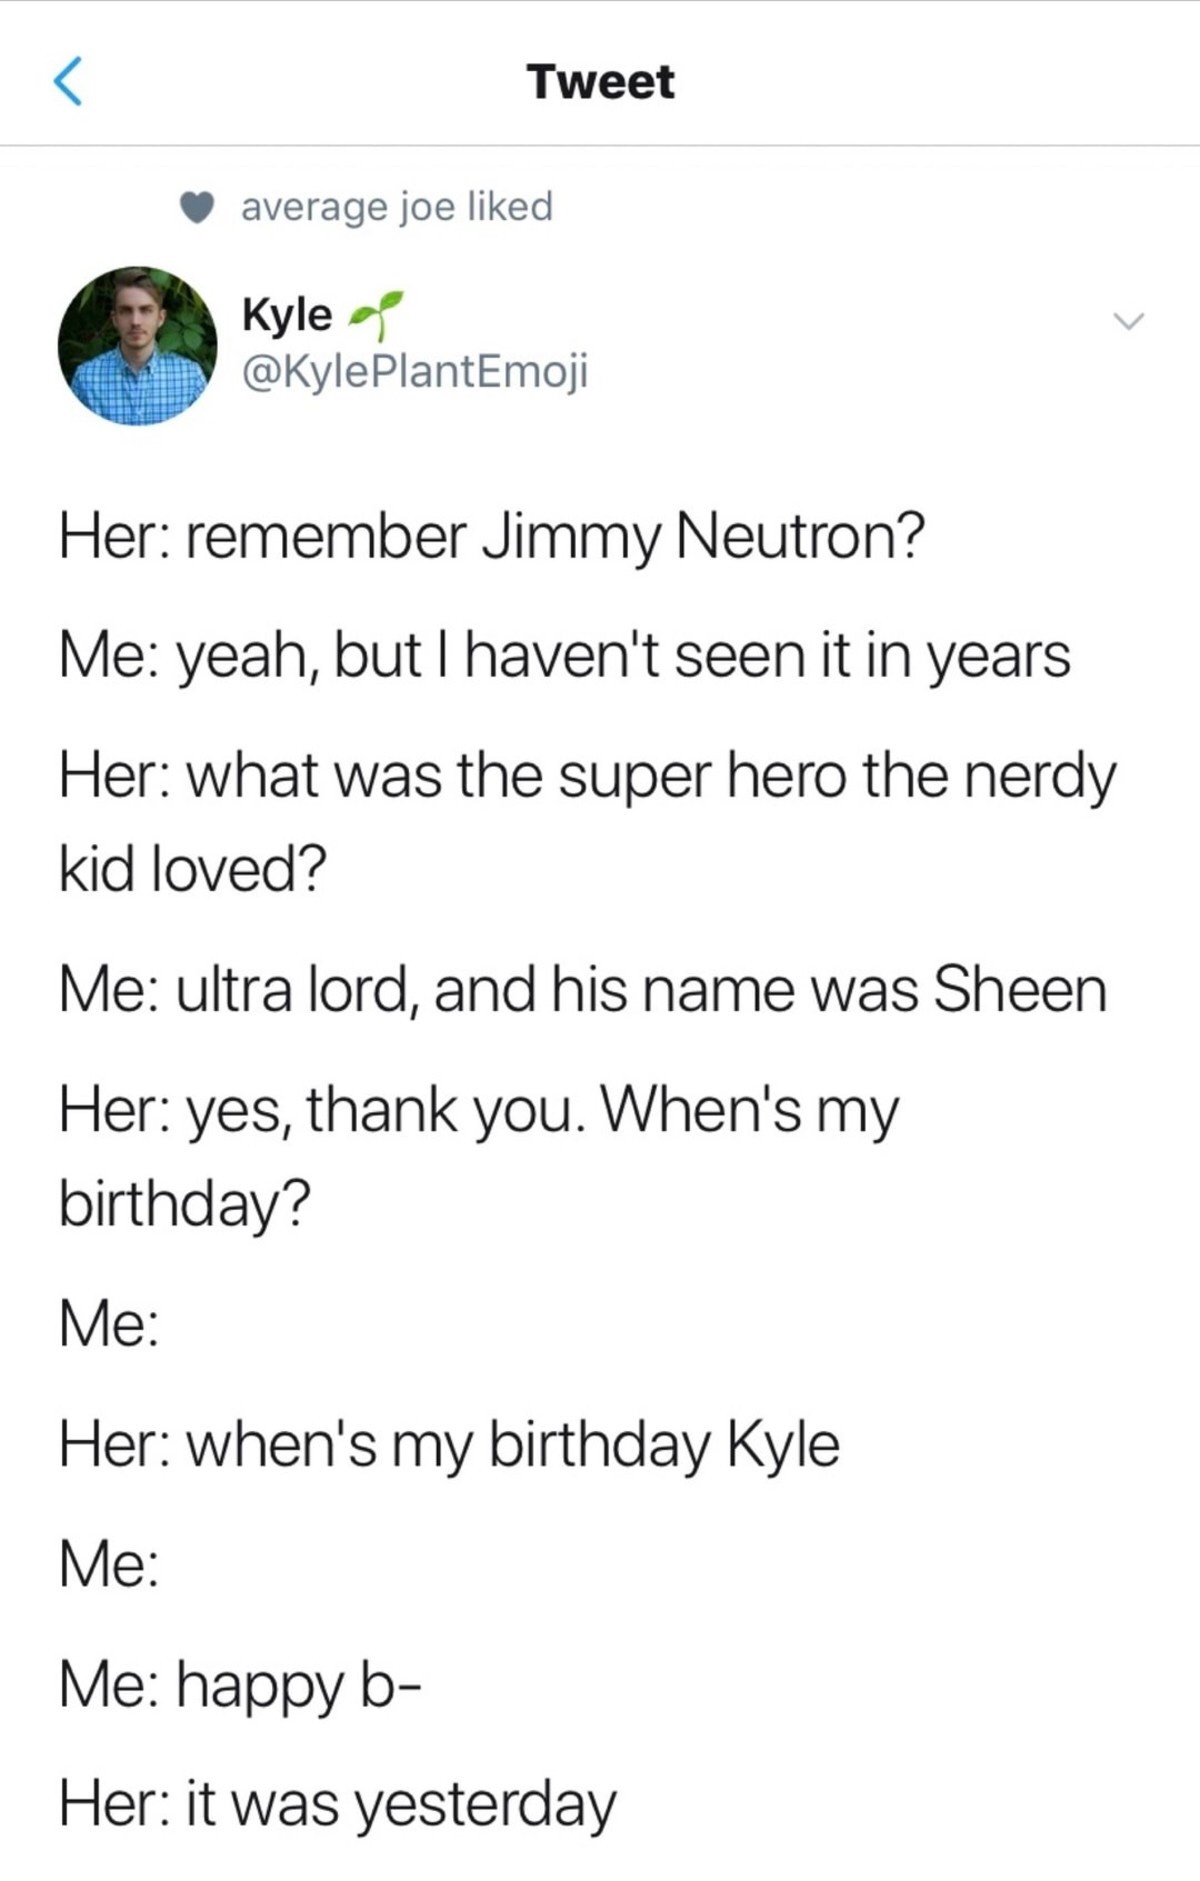 document - Tweet average joe d Kyle PlantEmoji Her remember Jimmy Neutron? Me yeah, but I haven't seen it in years Her what was the super hero the nerdy kid loved? Me ultra lord, and his name was Sheen Her yes, thank you. When's my birthday? Me Her when's